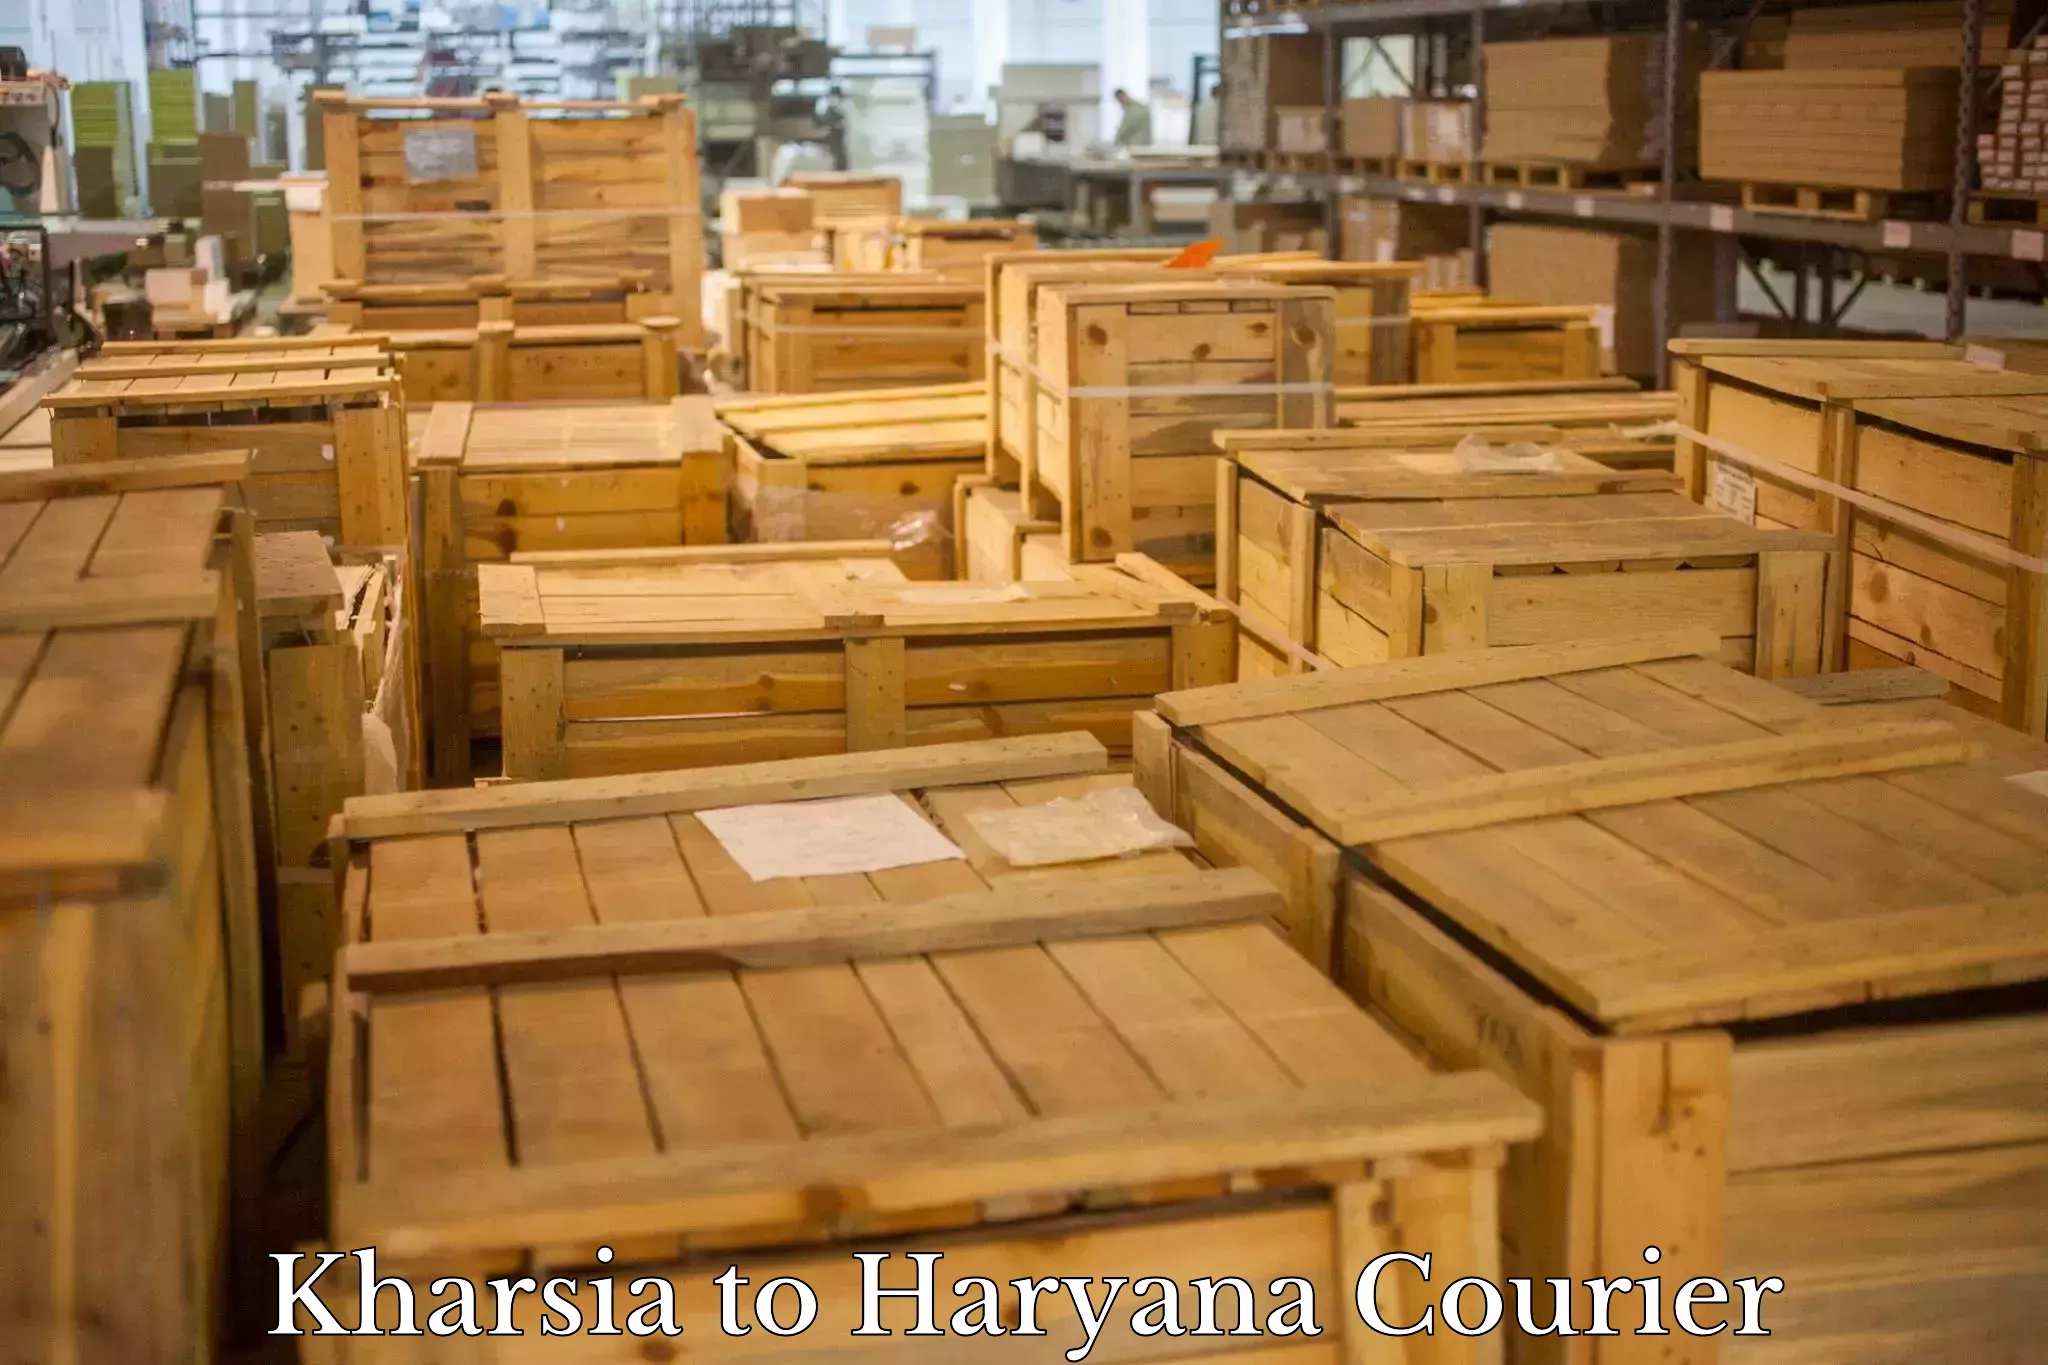 Ocean freight courier Kharsia to Sonipat